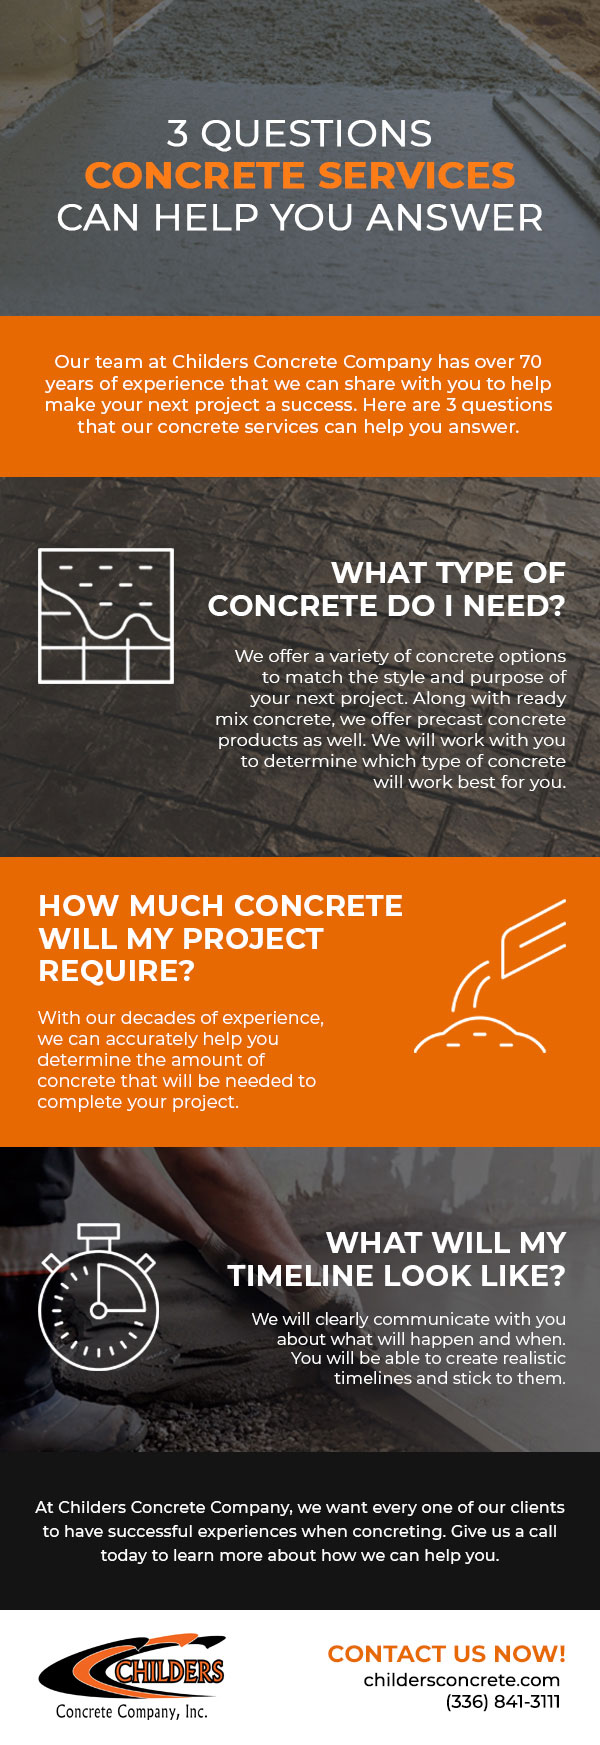 3 Questions Concrete Services Can Help You Answer